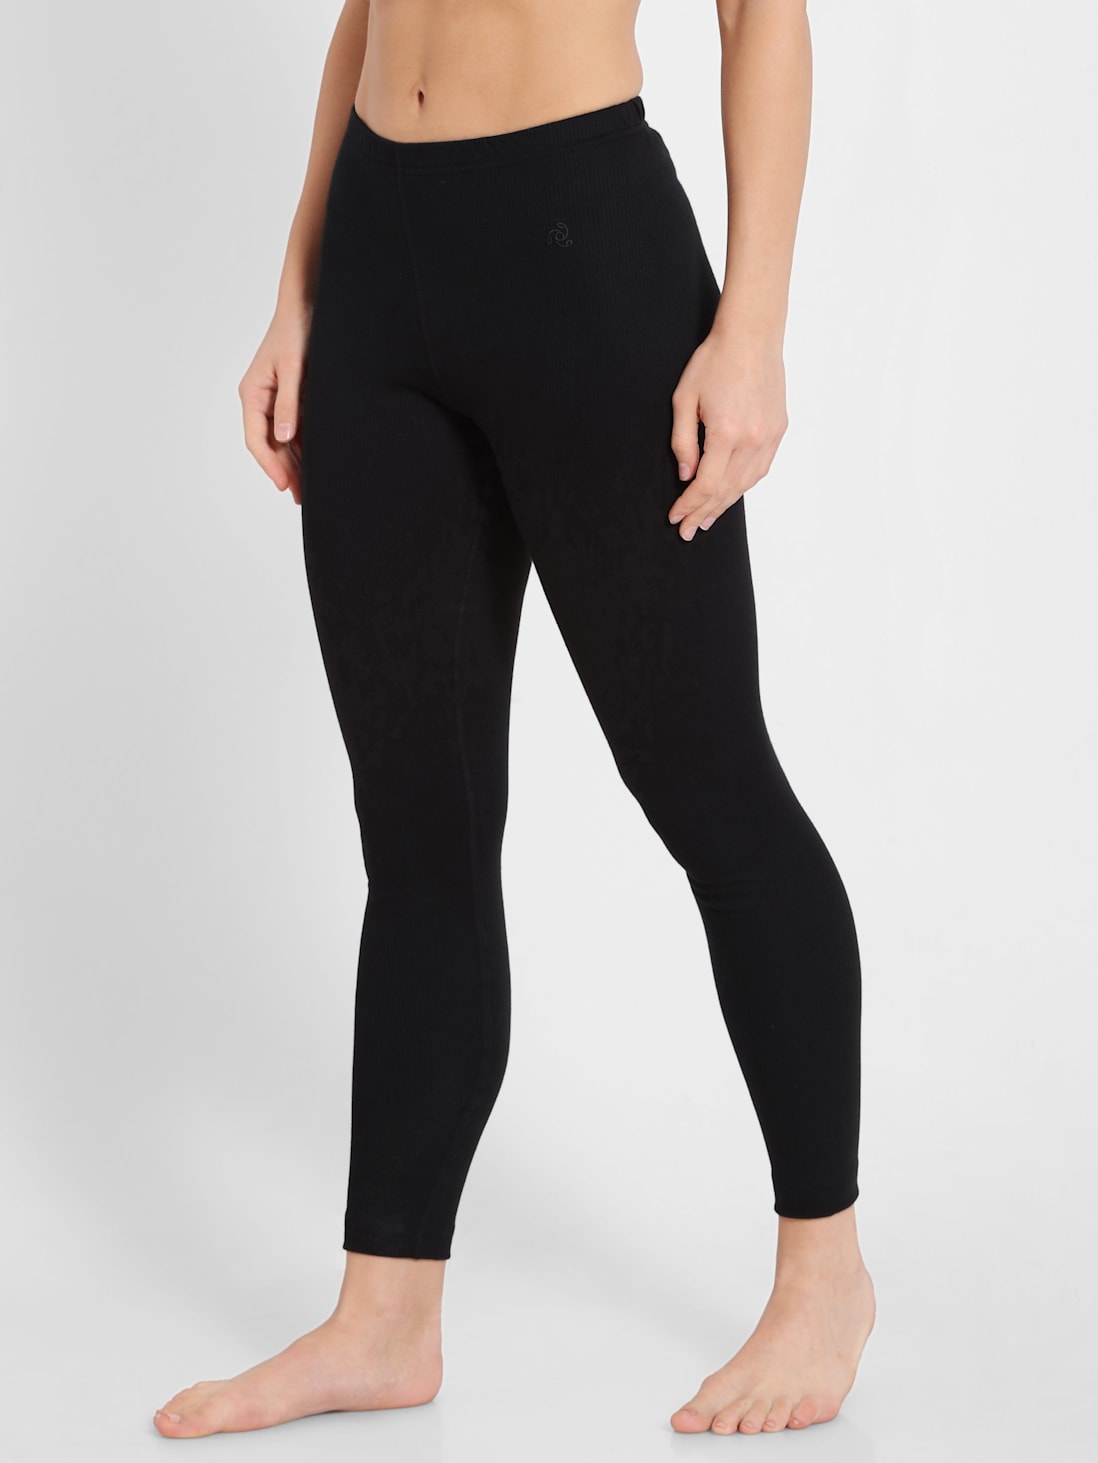 Womens Velvet Slimming Fluffy Leggings Primark Sexy Winter Thermal Underwear  With Fleece Lining For A Stretchy And Warm Look Size 231018 From Lu04,  $11.09 | DHgate.Com